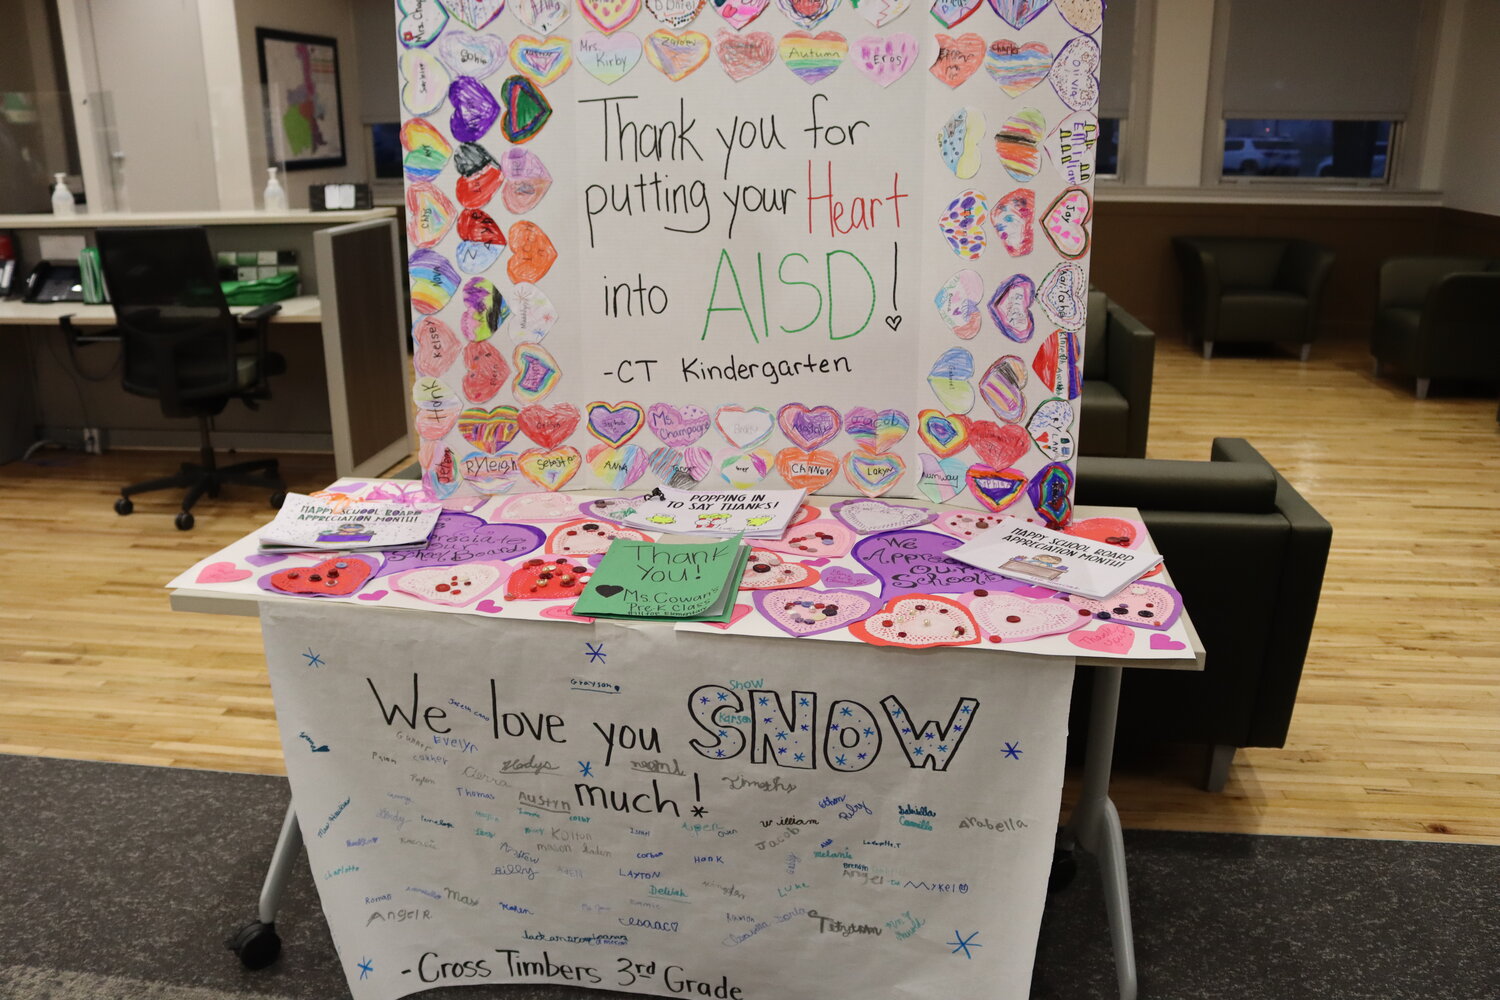 Azle schools showed their support for the board during January by creating thank you posters, letters and pictures.